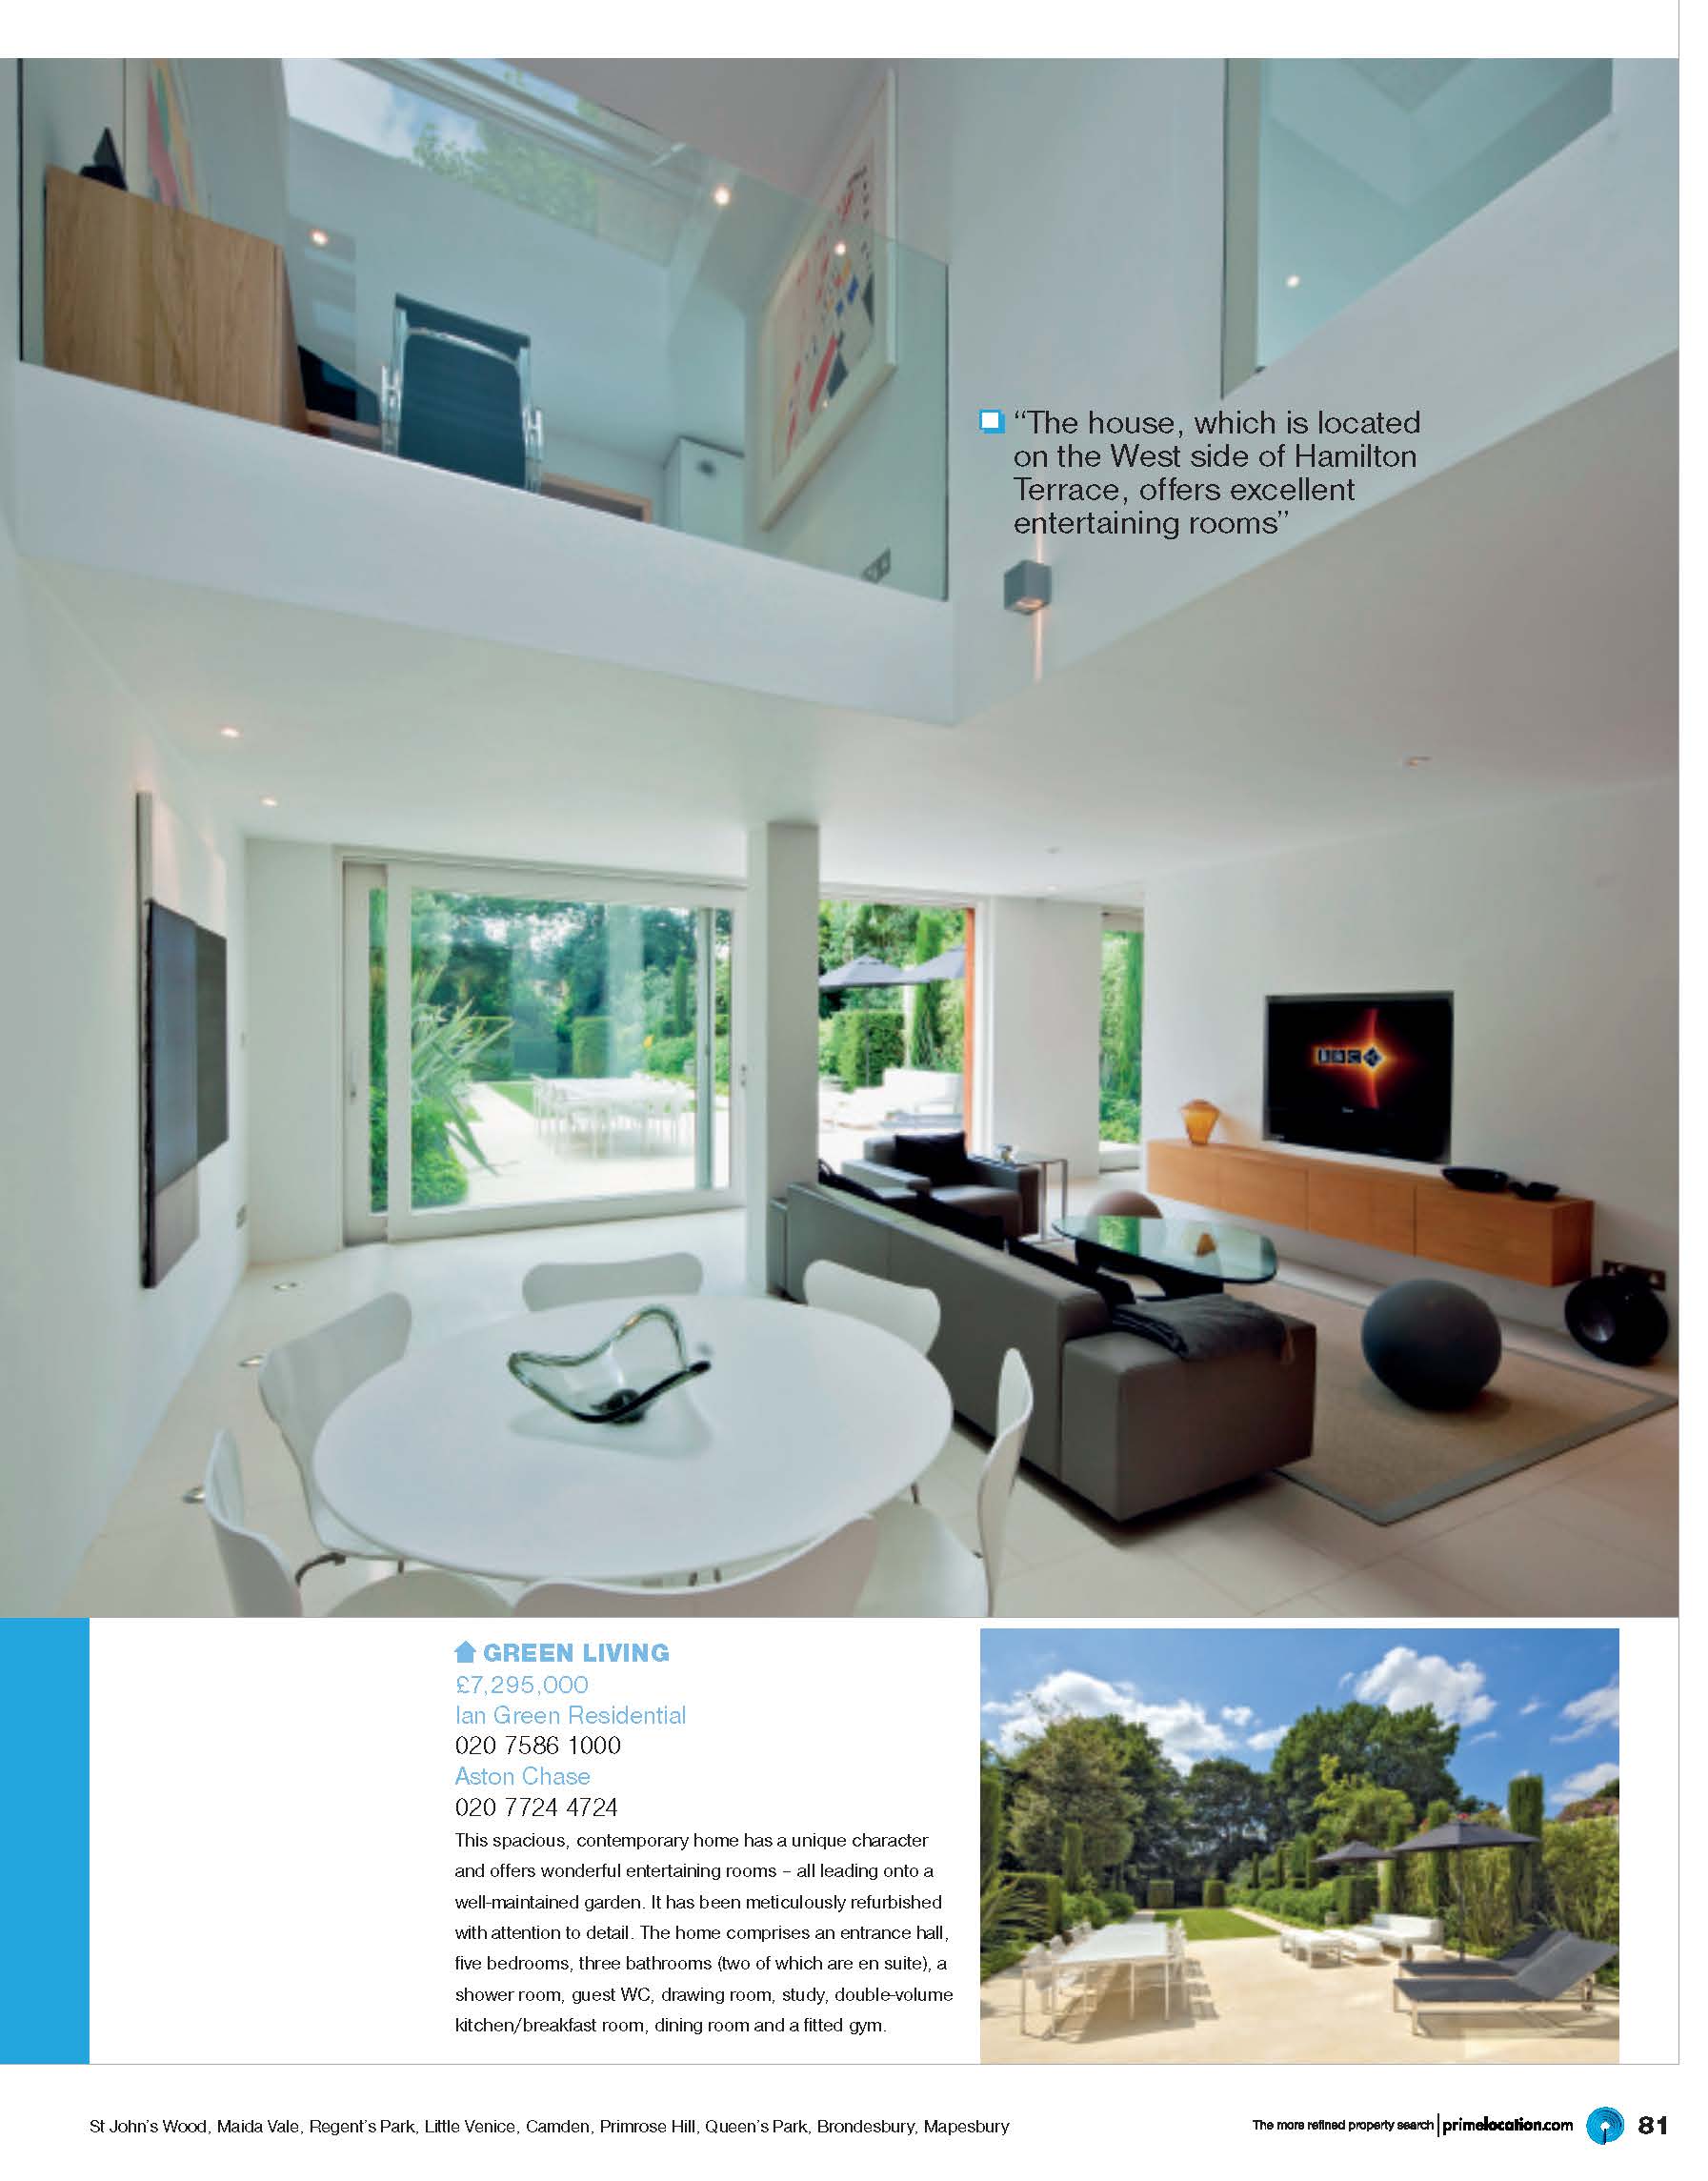 IanGreen-media-LONDON-PROPERTY-COVER-AUGUST-2010